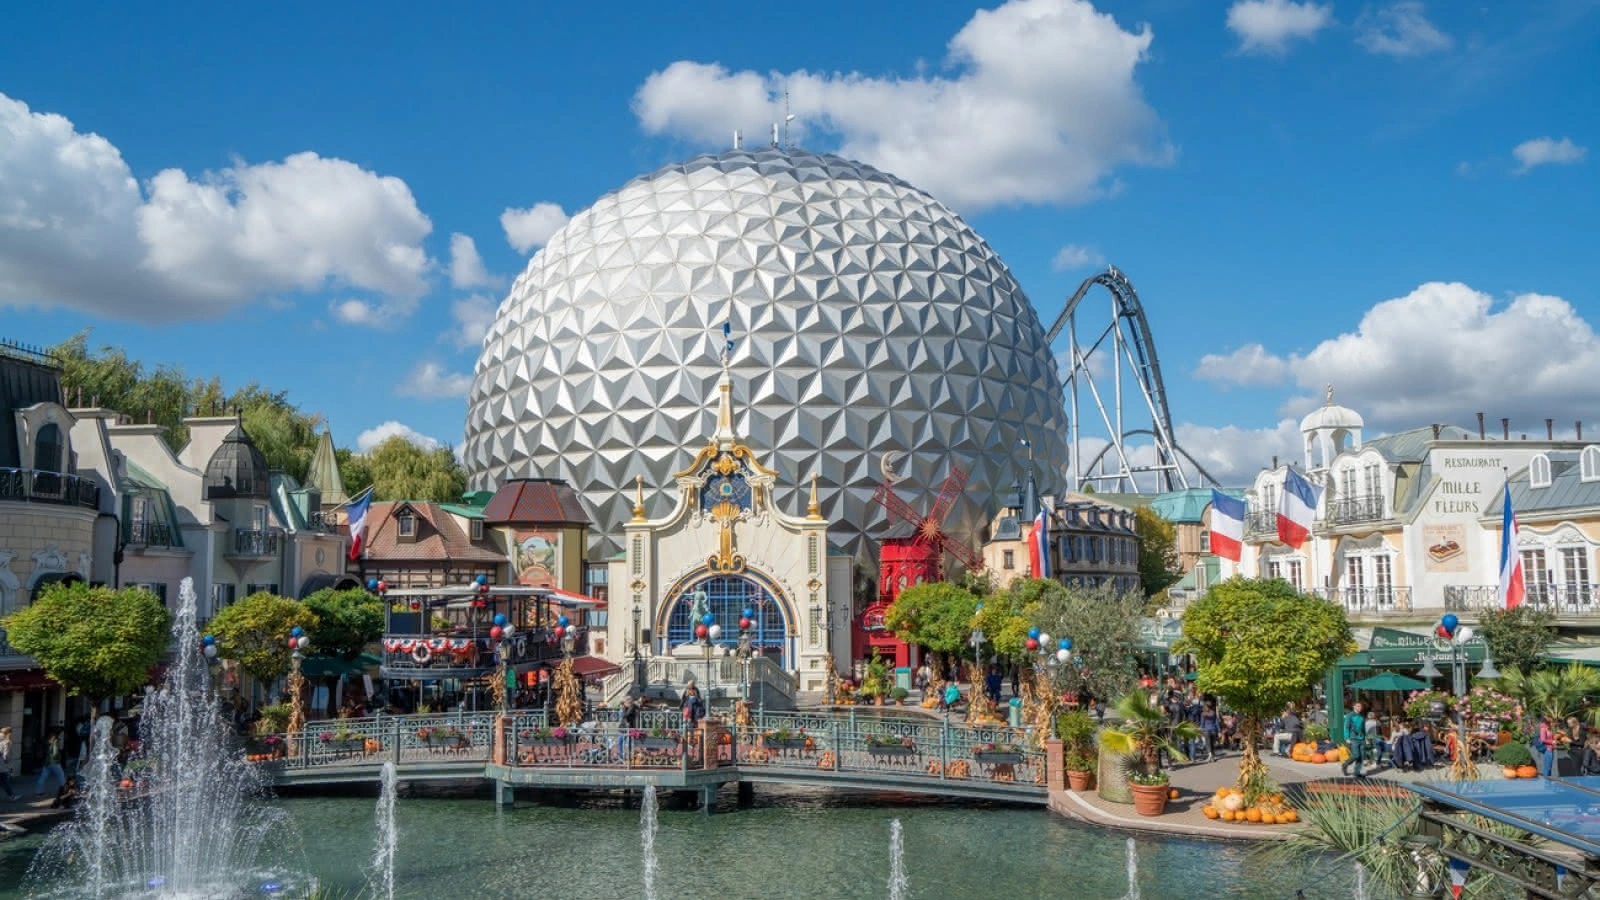 Europa-Park: Fun and Culture in Germany’s Largest Park